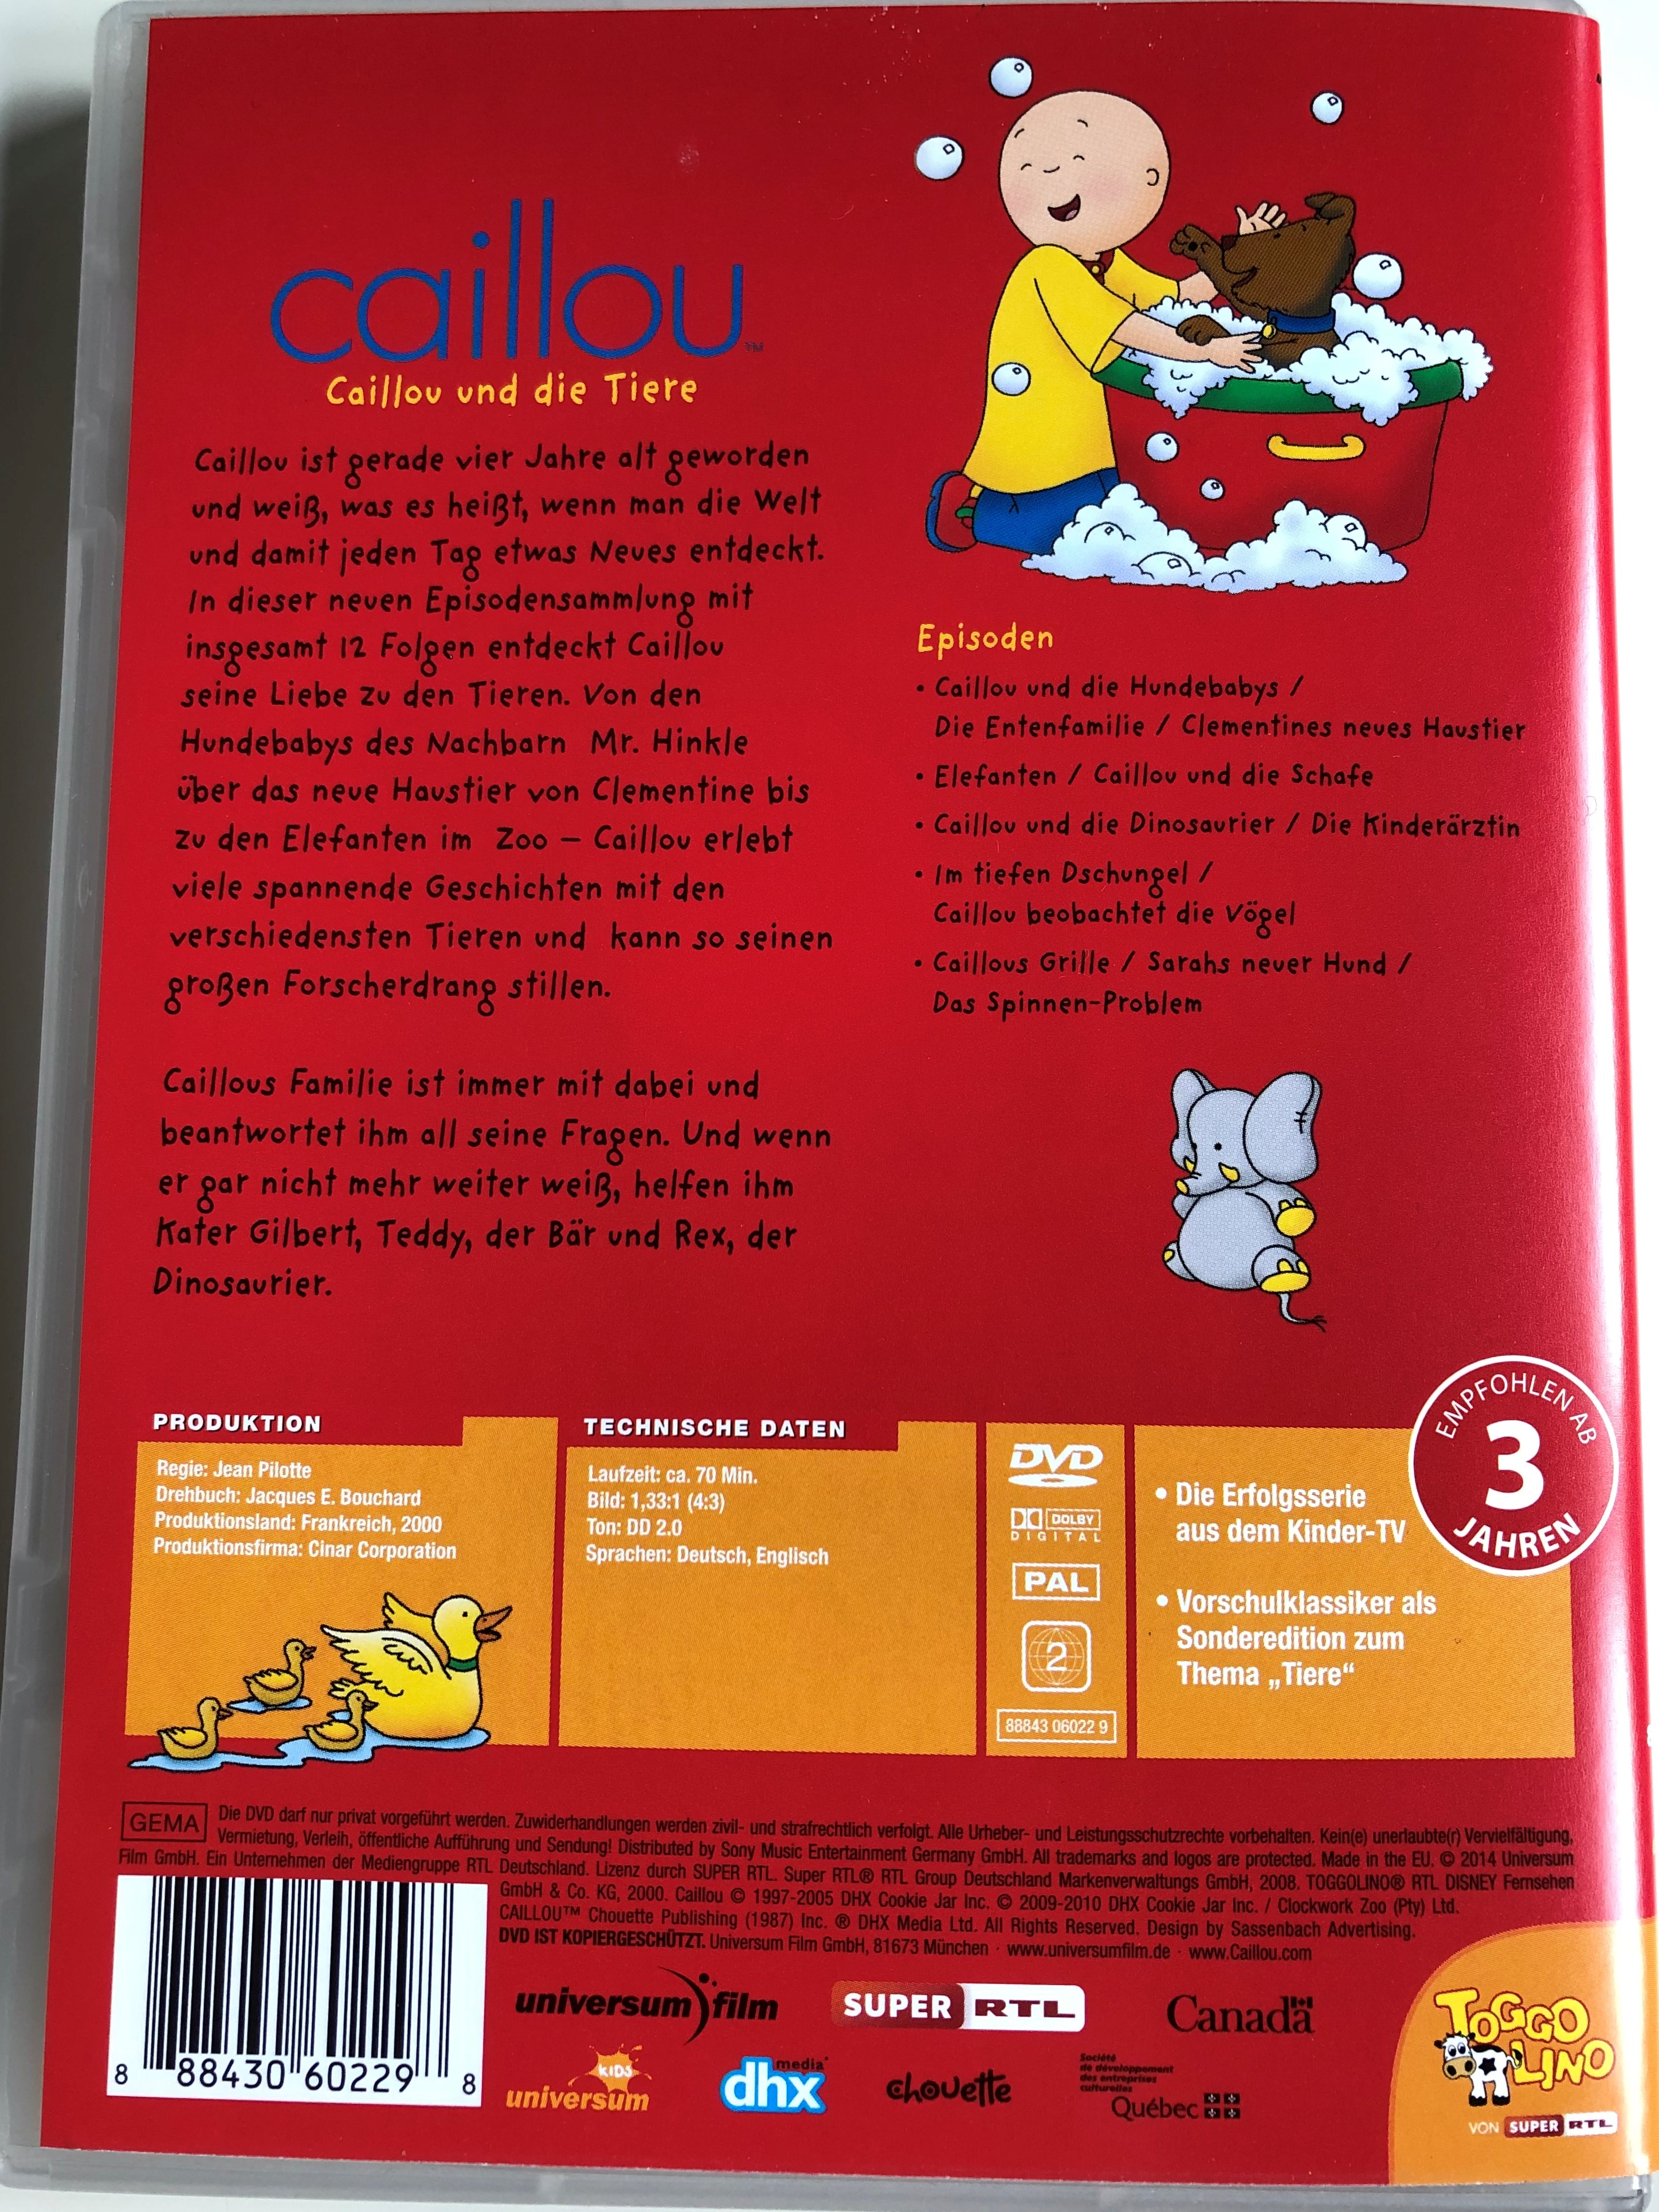 caillou-dvd-2000-caillou-und-die-tiere-directed-by-jean-pilotte-canadian-educational-children-s-television-series-2.jpg